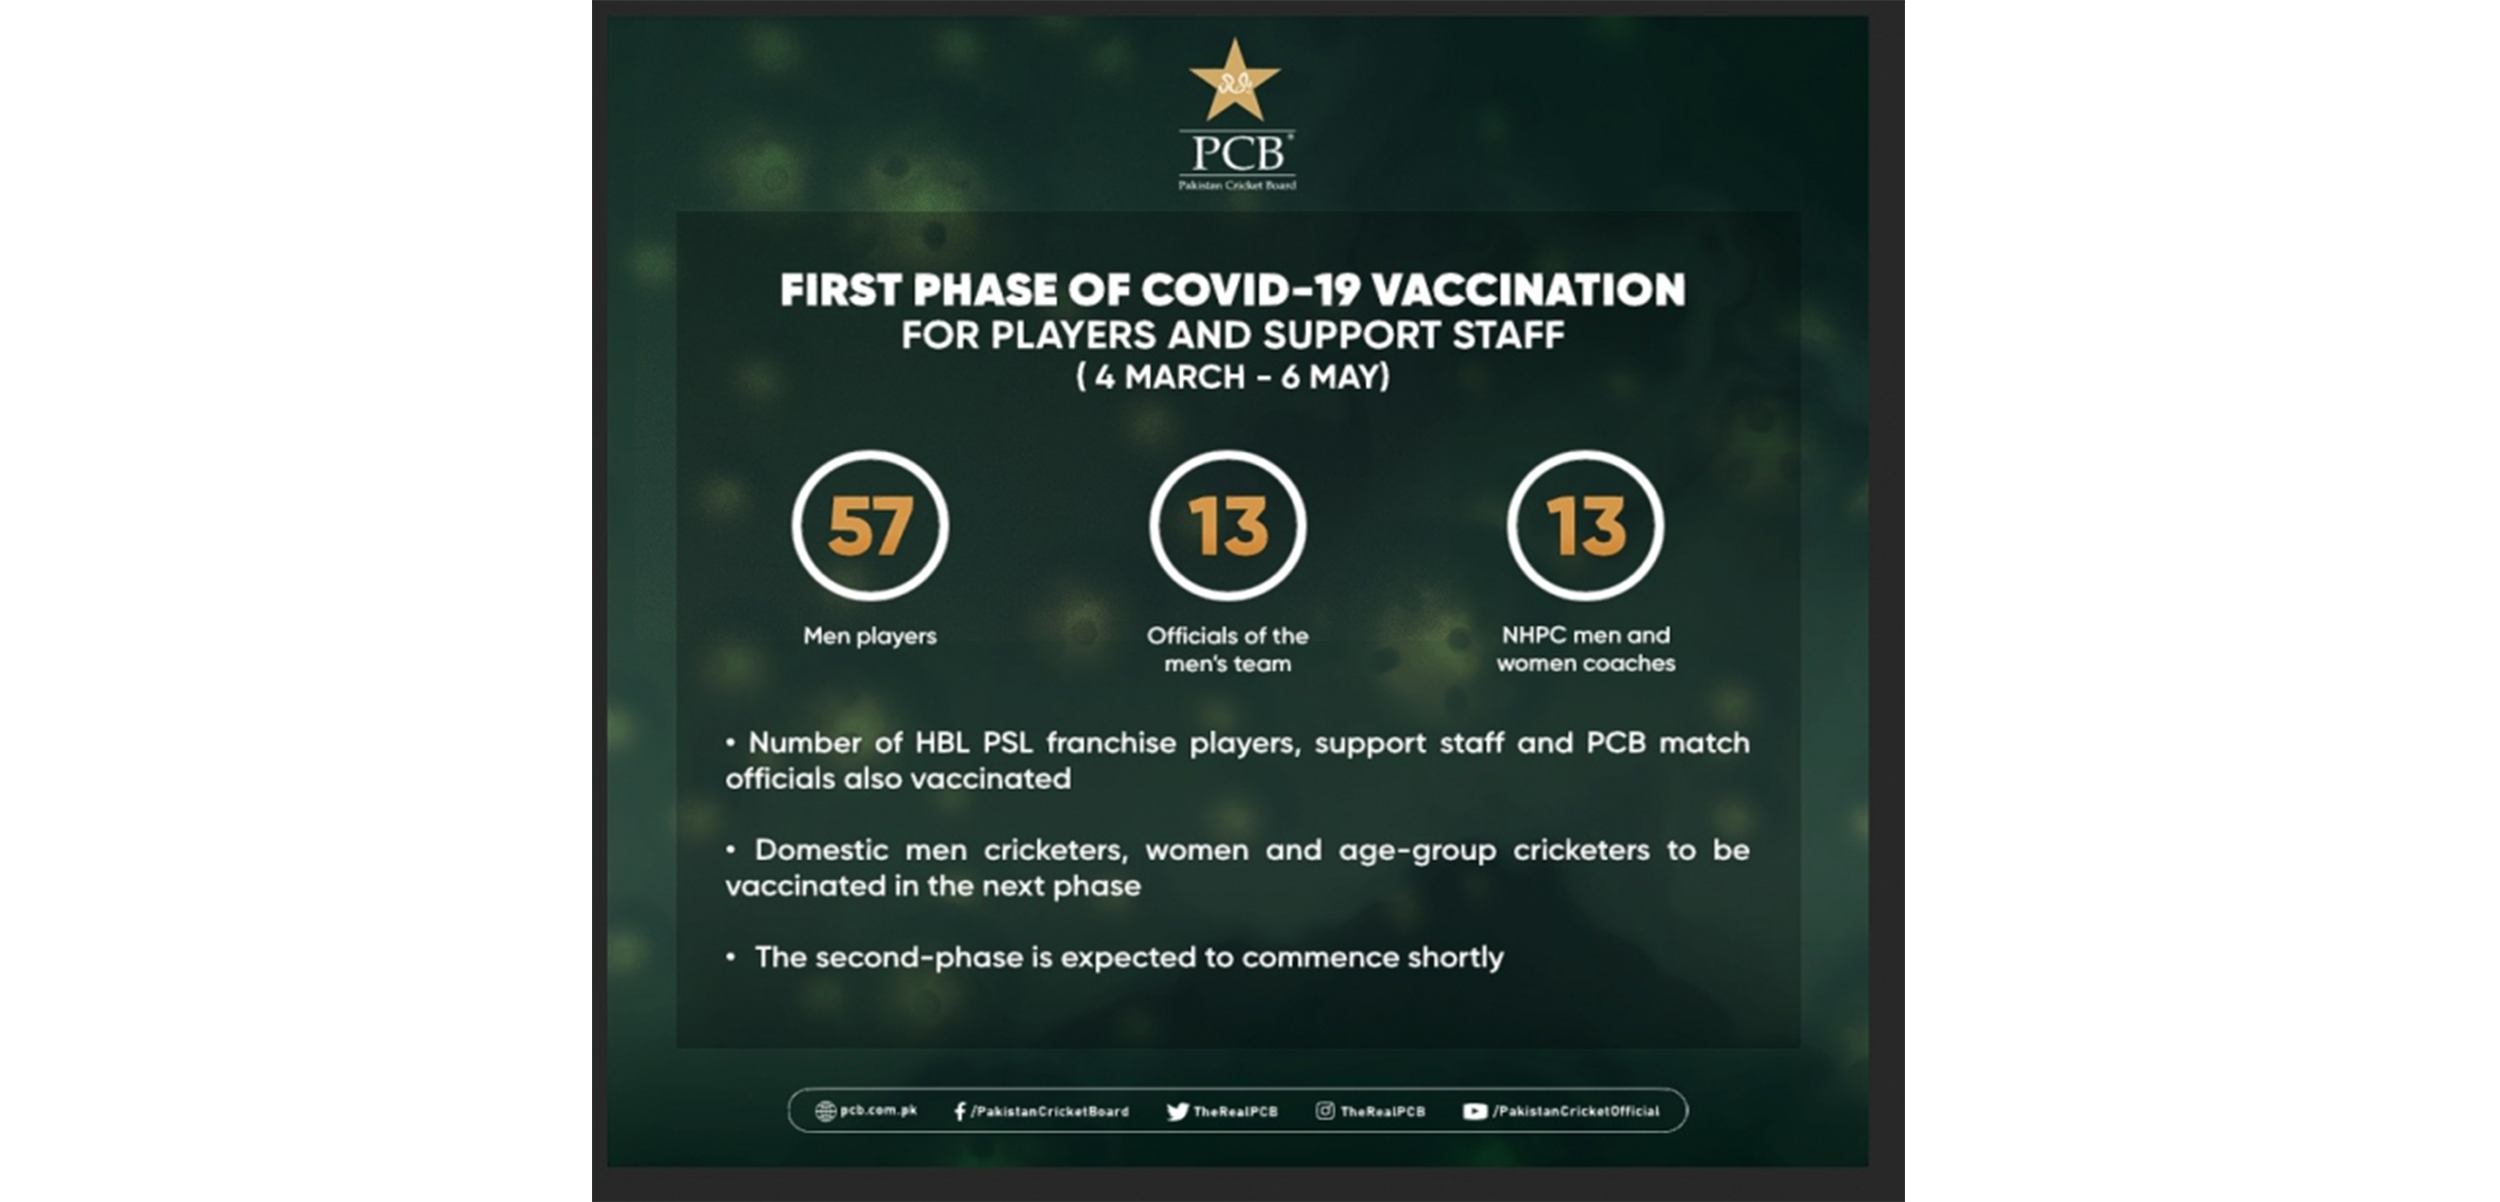 PCB completes first phase of Covid-19 vaccination for players and support staff